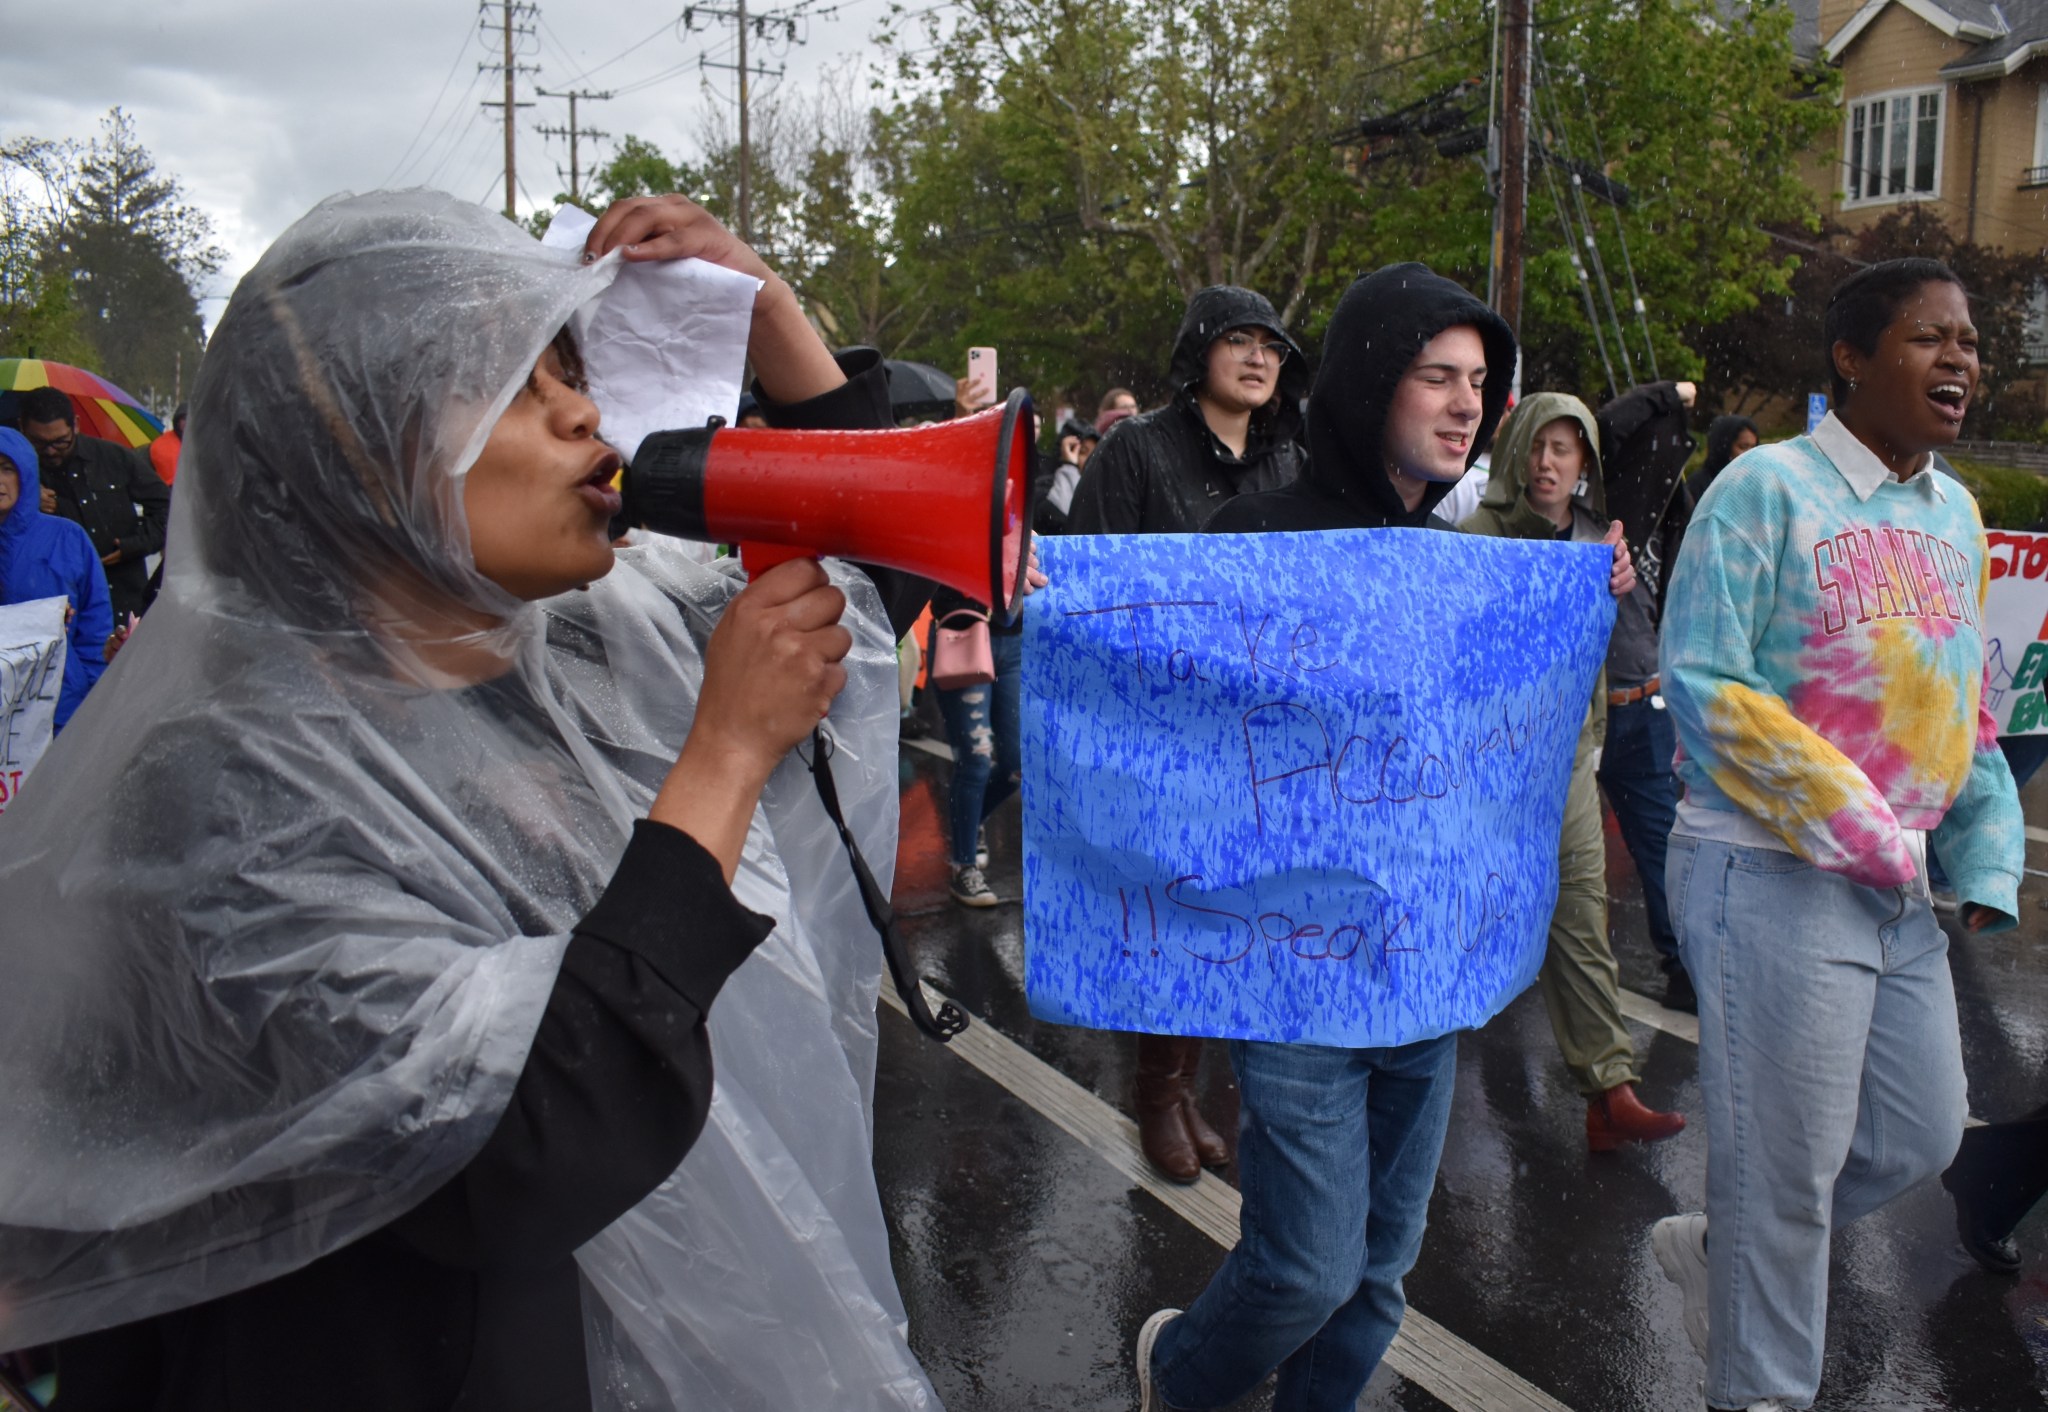 Protestors march in the rain. One holds a sign; another holds a megaphone.